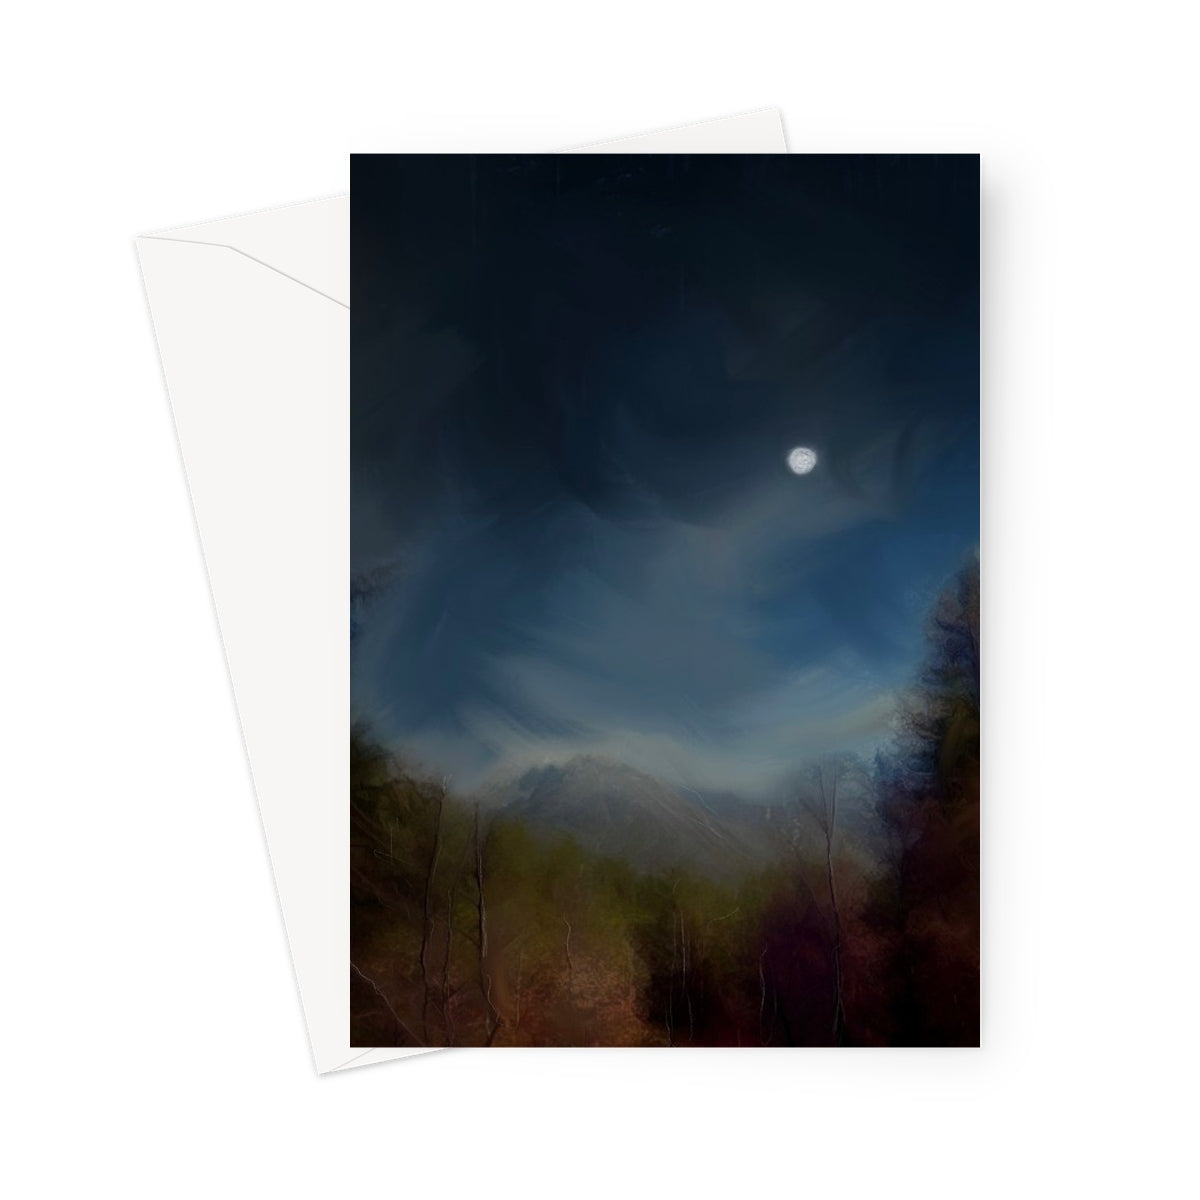 Glencoe Lochan Moonlight Art Gifts Greeting Card-Greetings Cards-Scottish Lochs & Mountains Art Gallery-5"x7"-10 Cards-Paintings, Prints, Homeware, Art Gifts From Scotland By Scottish Artist Kevin Hunter